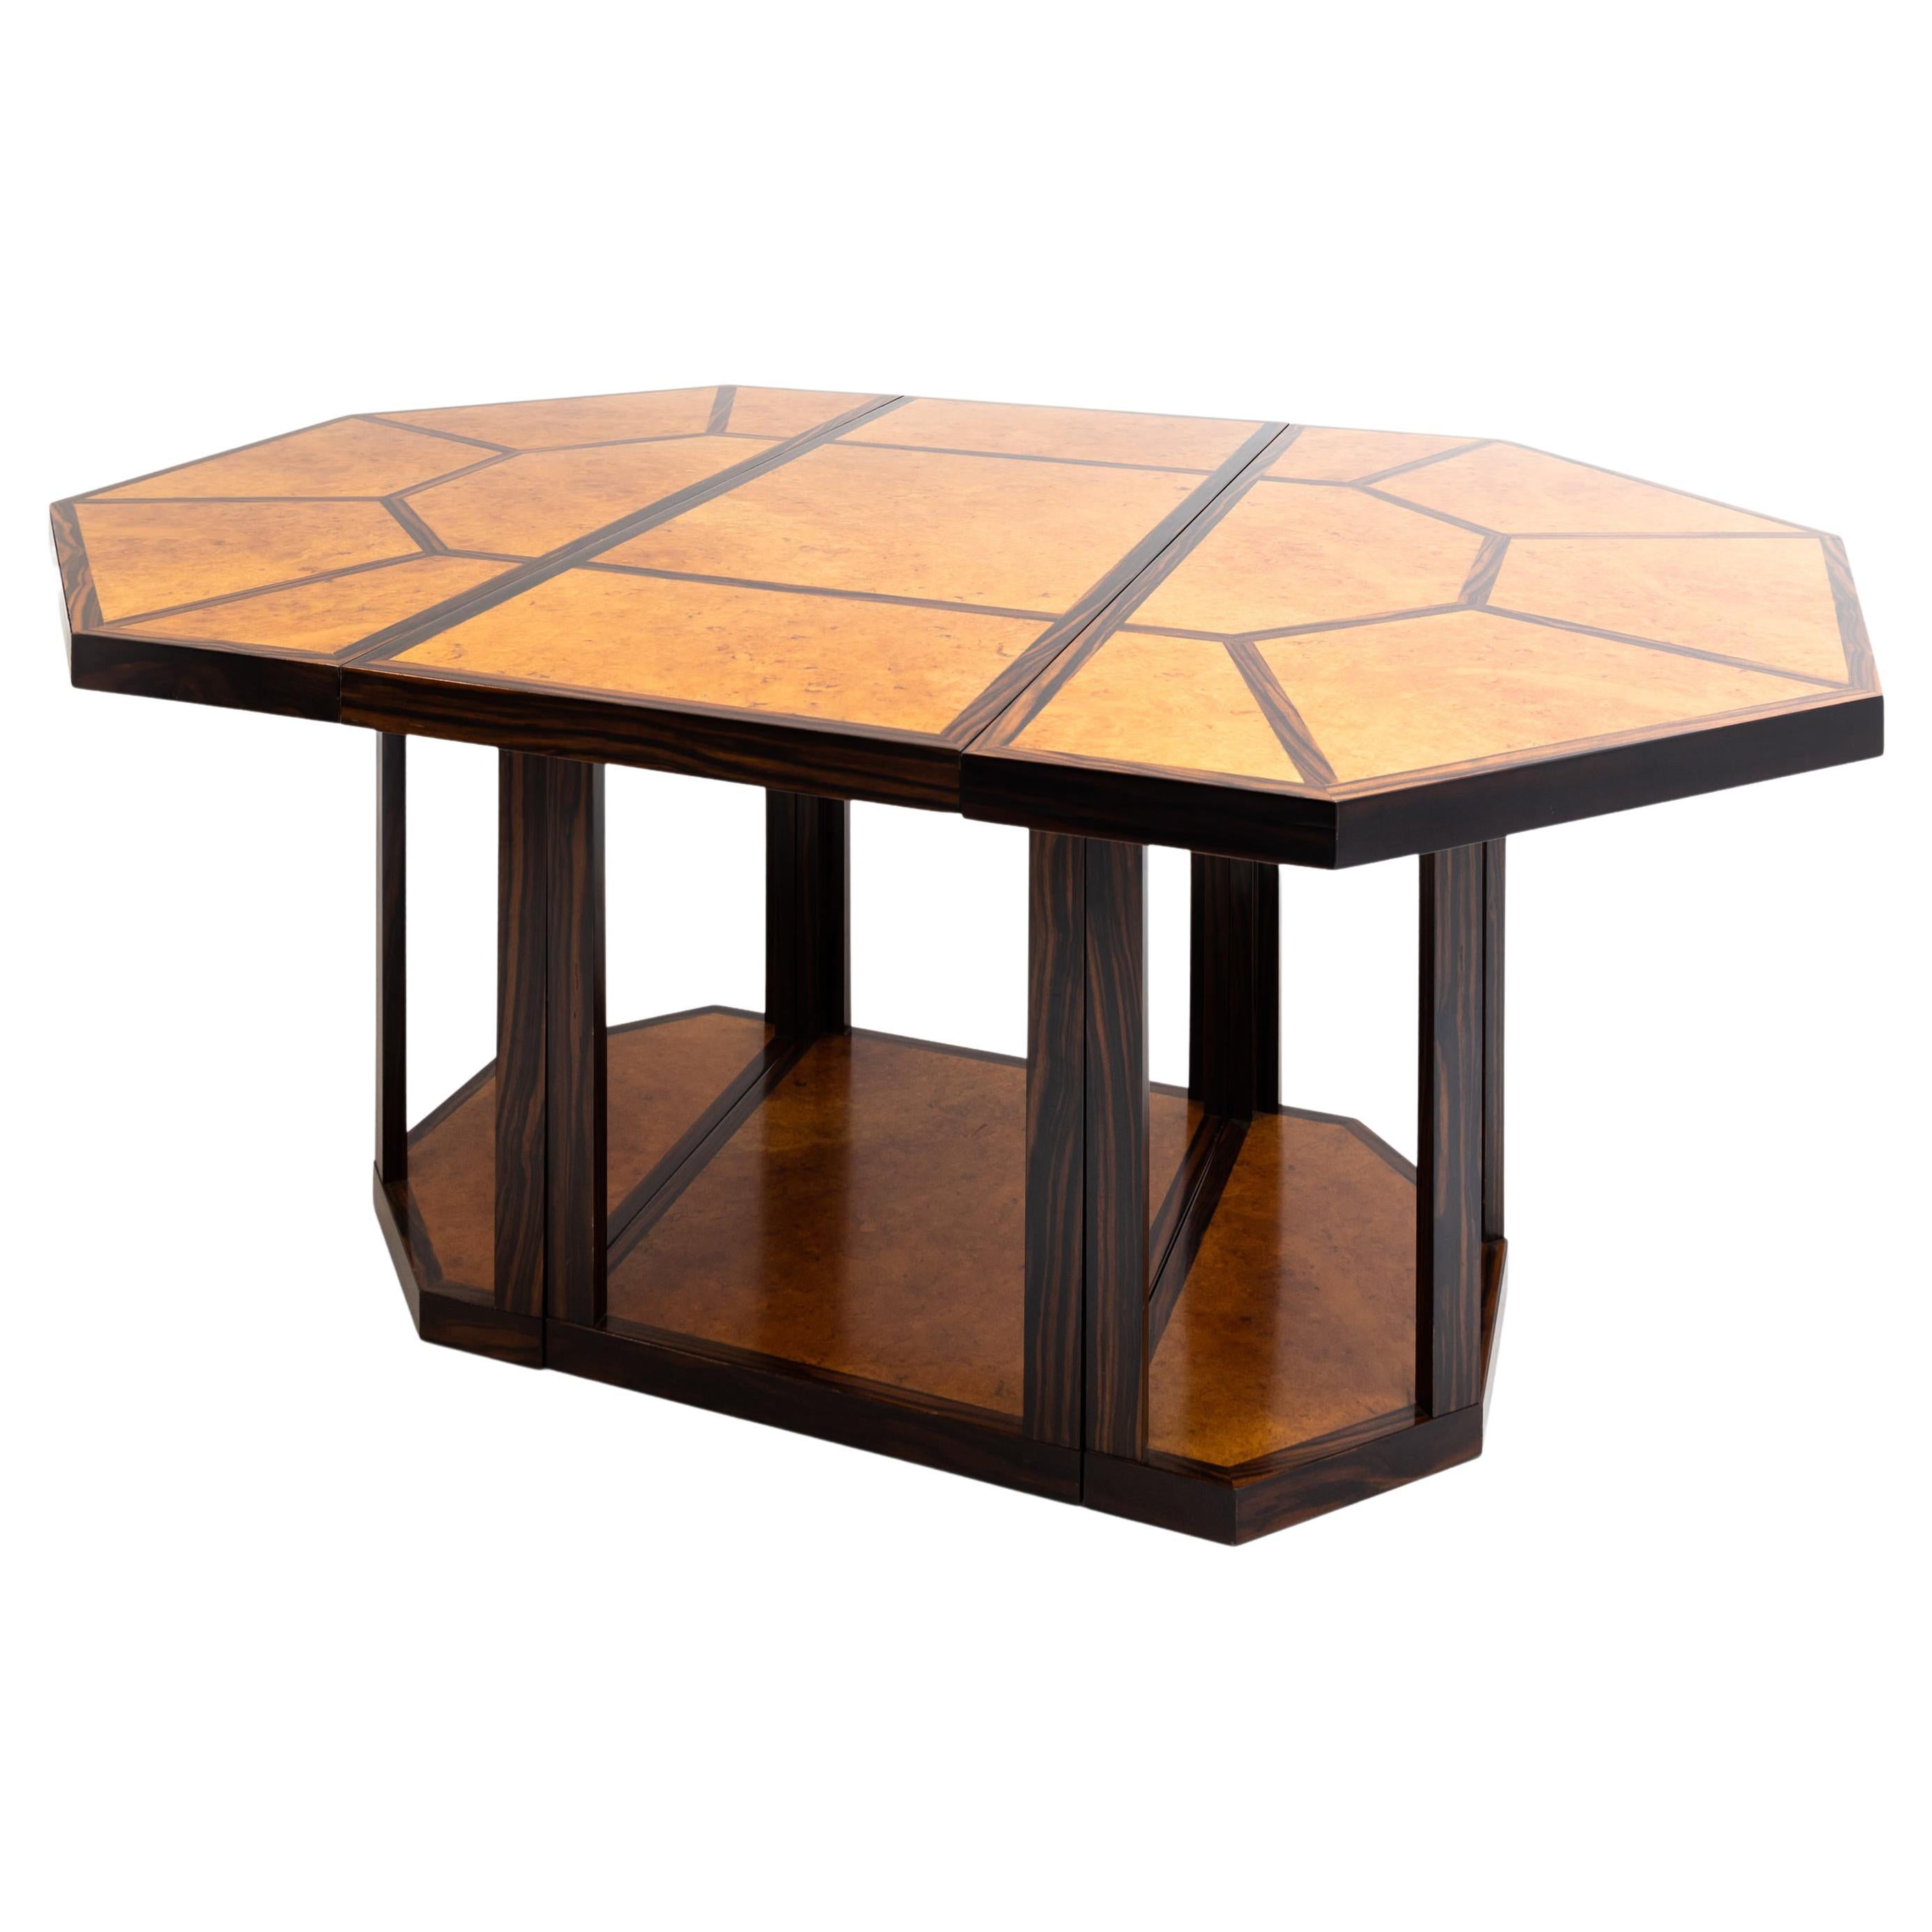 'Puzzle' Table by Gabriella Crespi For Sale